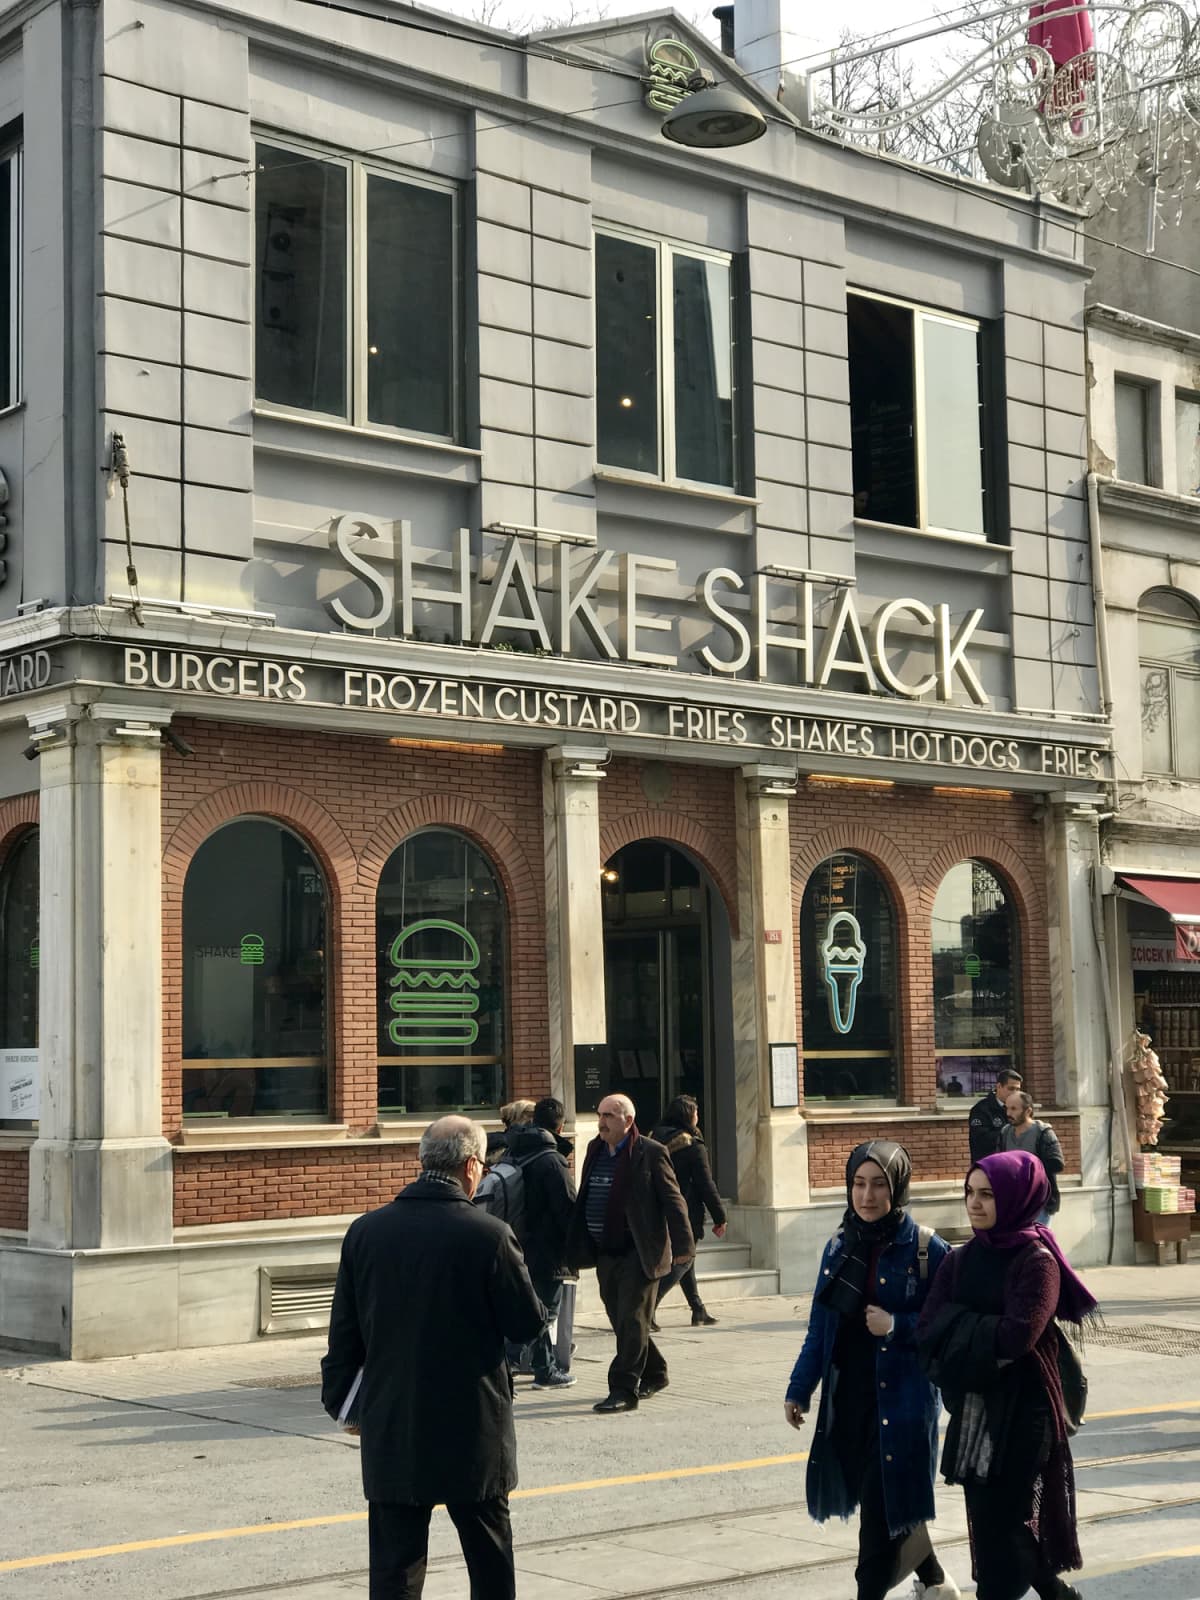 A general view of the restaurant Shake Shack in Washington, DC, December 30, 2014. The fast-food chain, started by celebrity restaurateur Danny Meyer, filed to go public on December 29, 2014. Backed by private equity firm Leonard Green & Partners, Shake Shack is a self-described modern day roadside burger stand whose vision is to stand for something good.       AFP PHOTO/JIM WATSON        (Photo credit should read JIM WATSON/AFP via Getty Images)